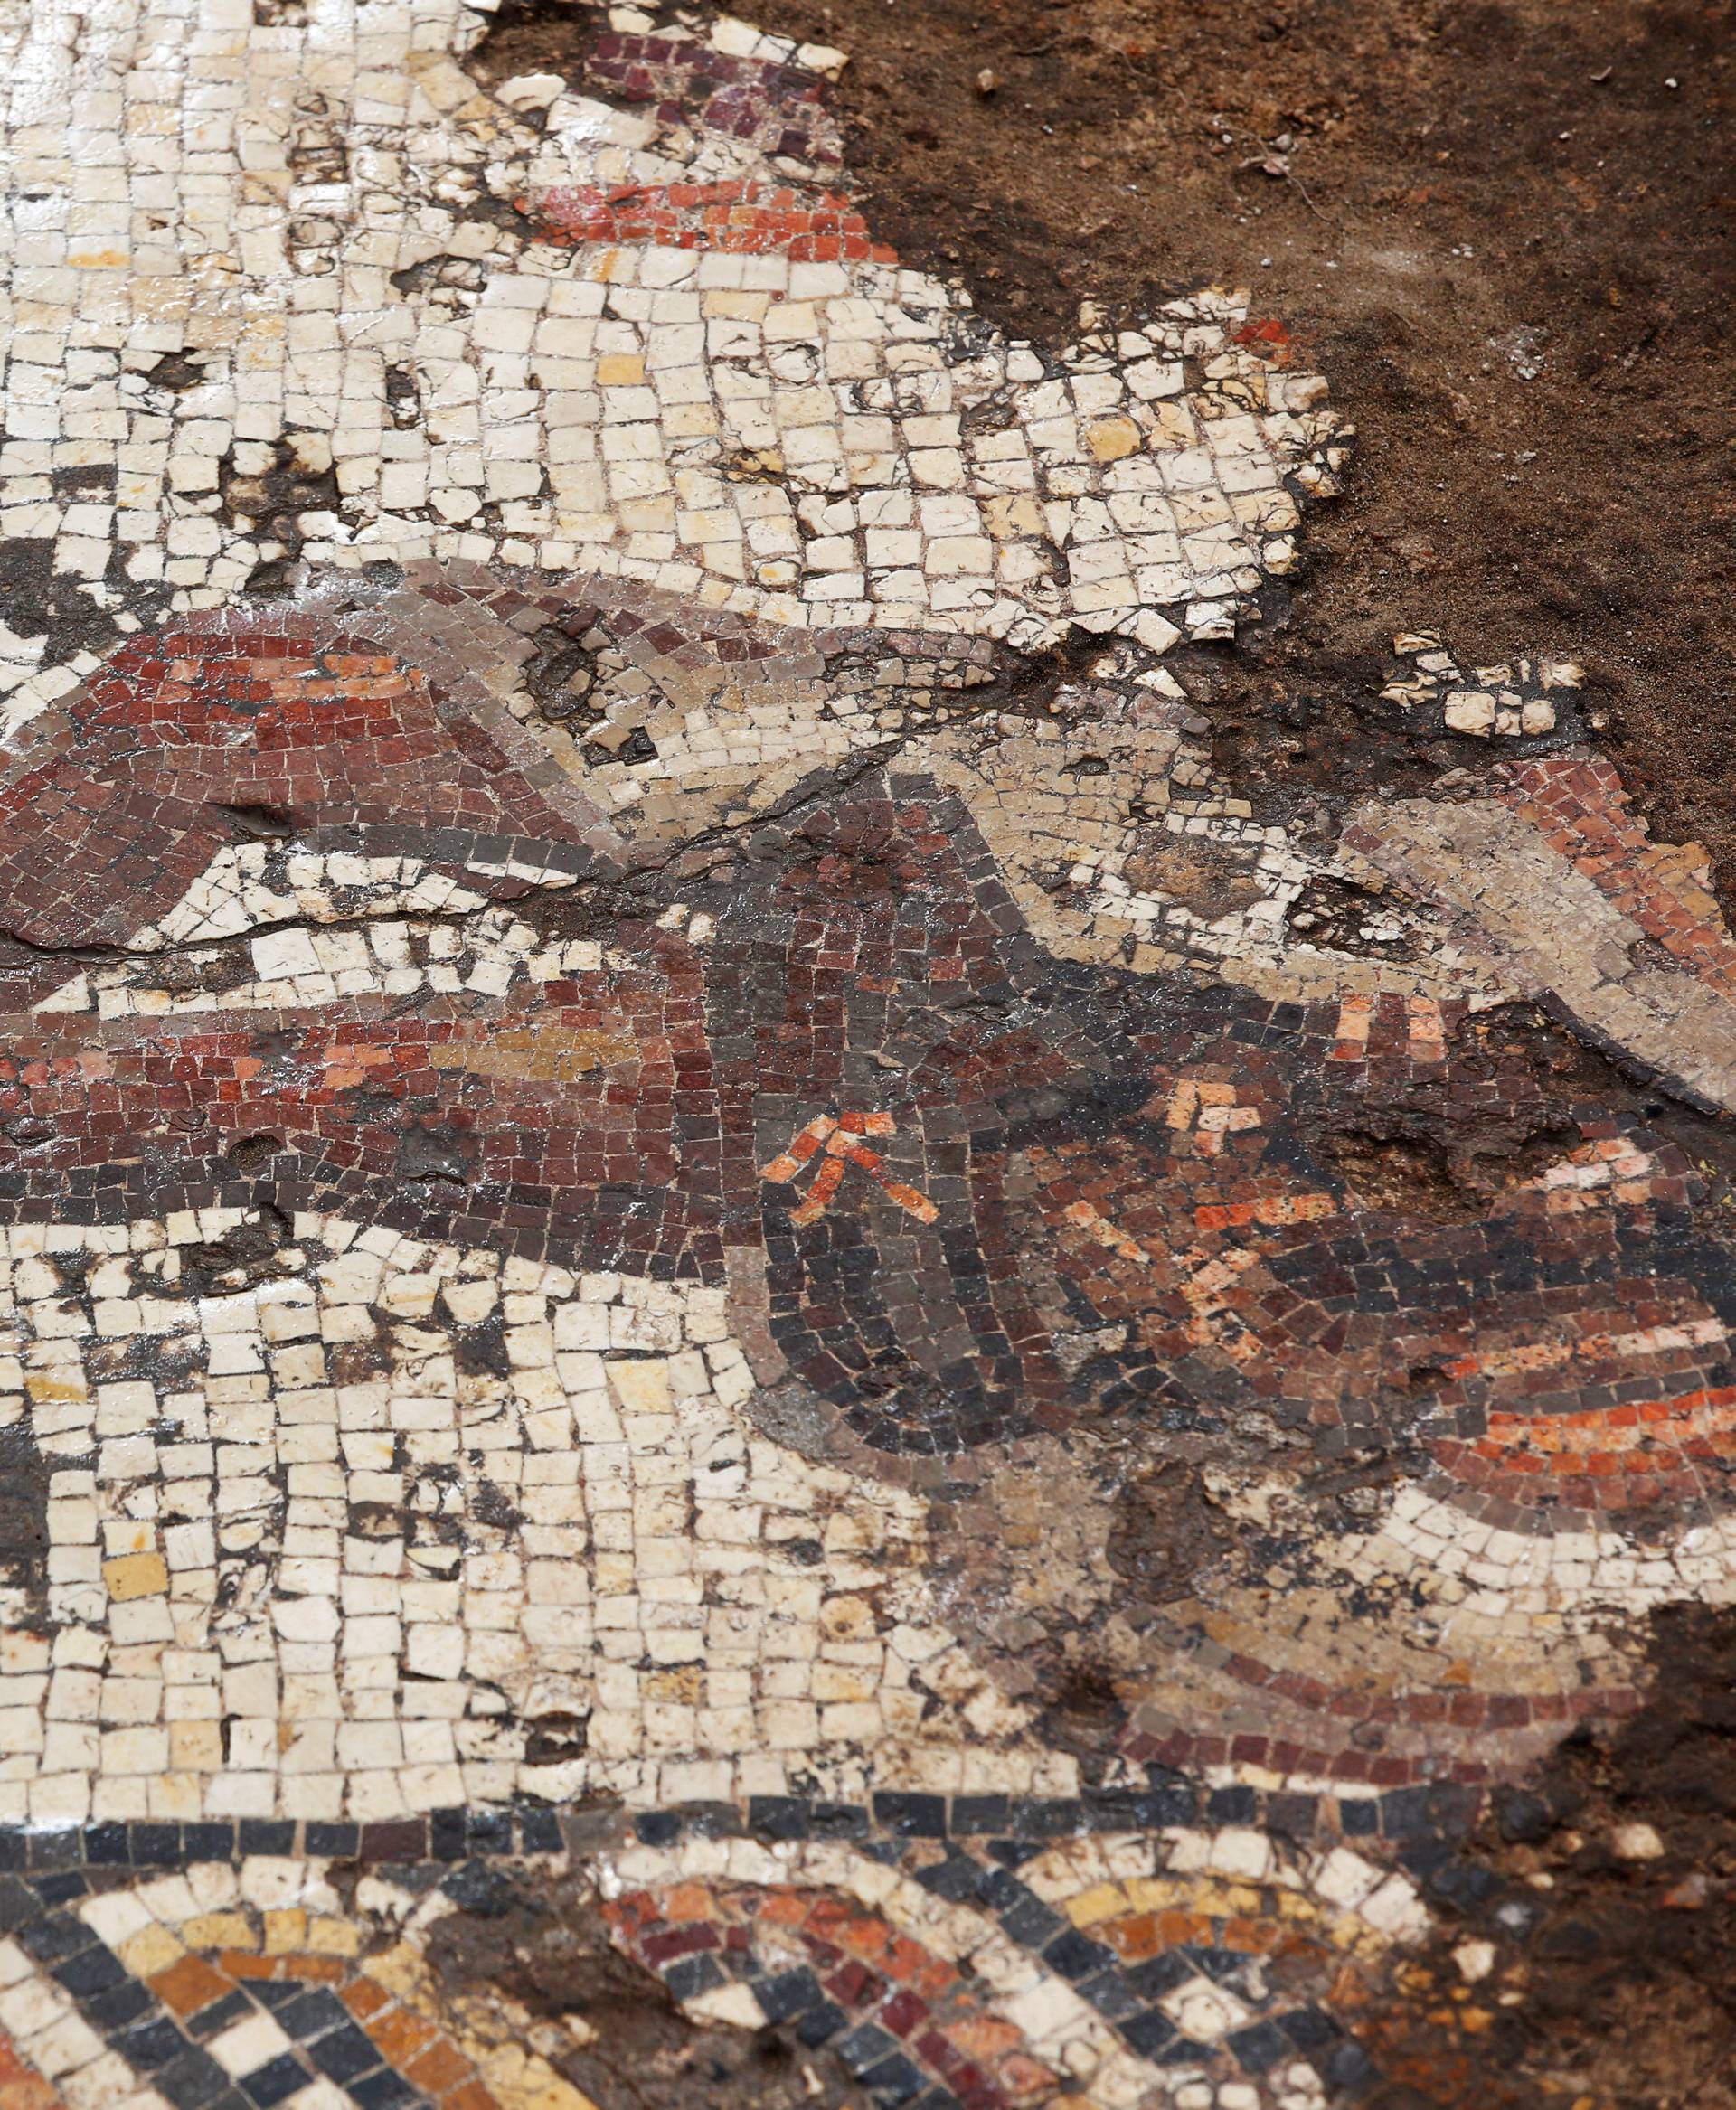 A decoration of a figure is seen on a mosaic floor which archaeologists say is 1,800 years old and was unearthed during an Israel Antiquities Authority excavation in Caesarea